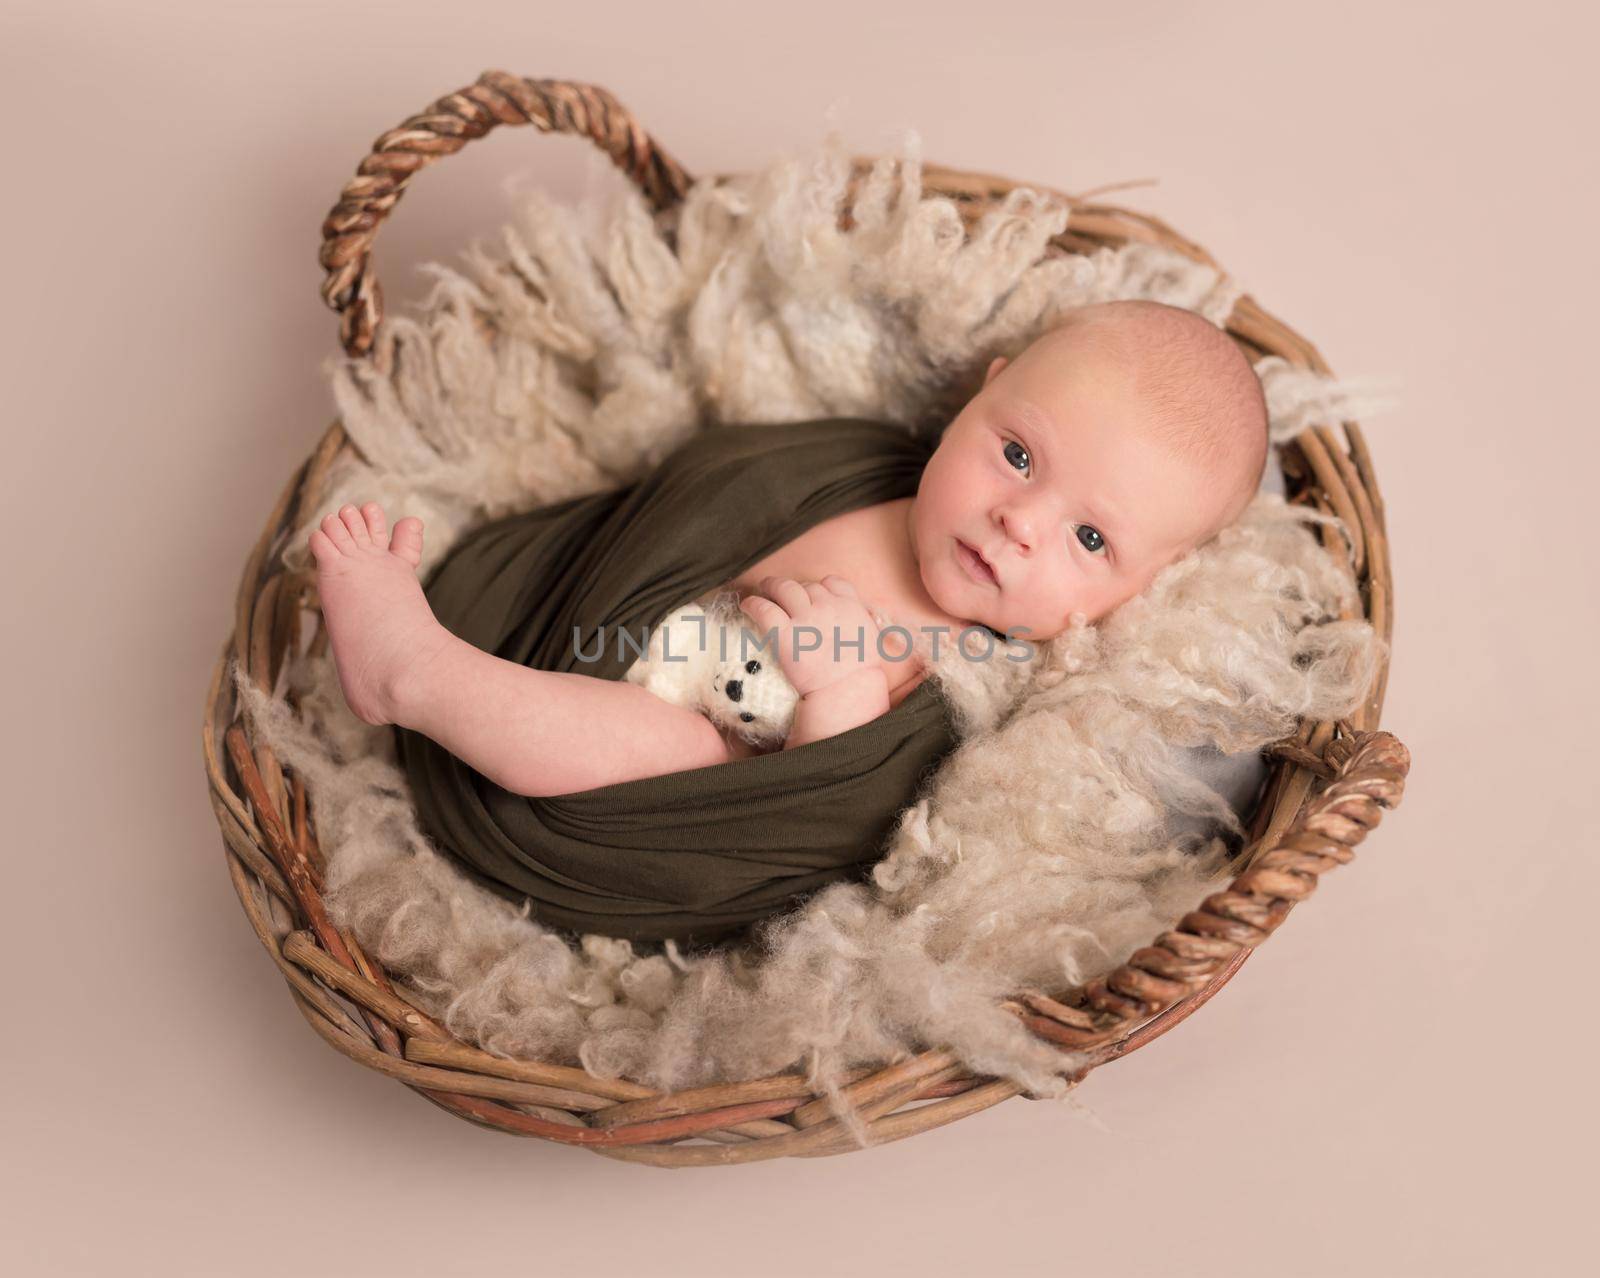 Little cute blue-eyes baby covered in a dark green blanket lying on the soft light brown bedcover